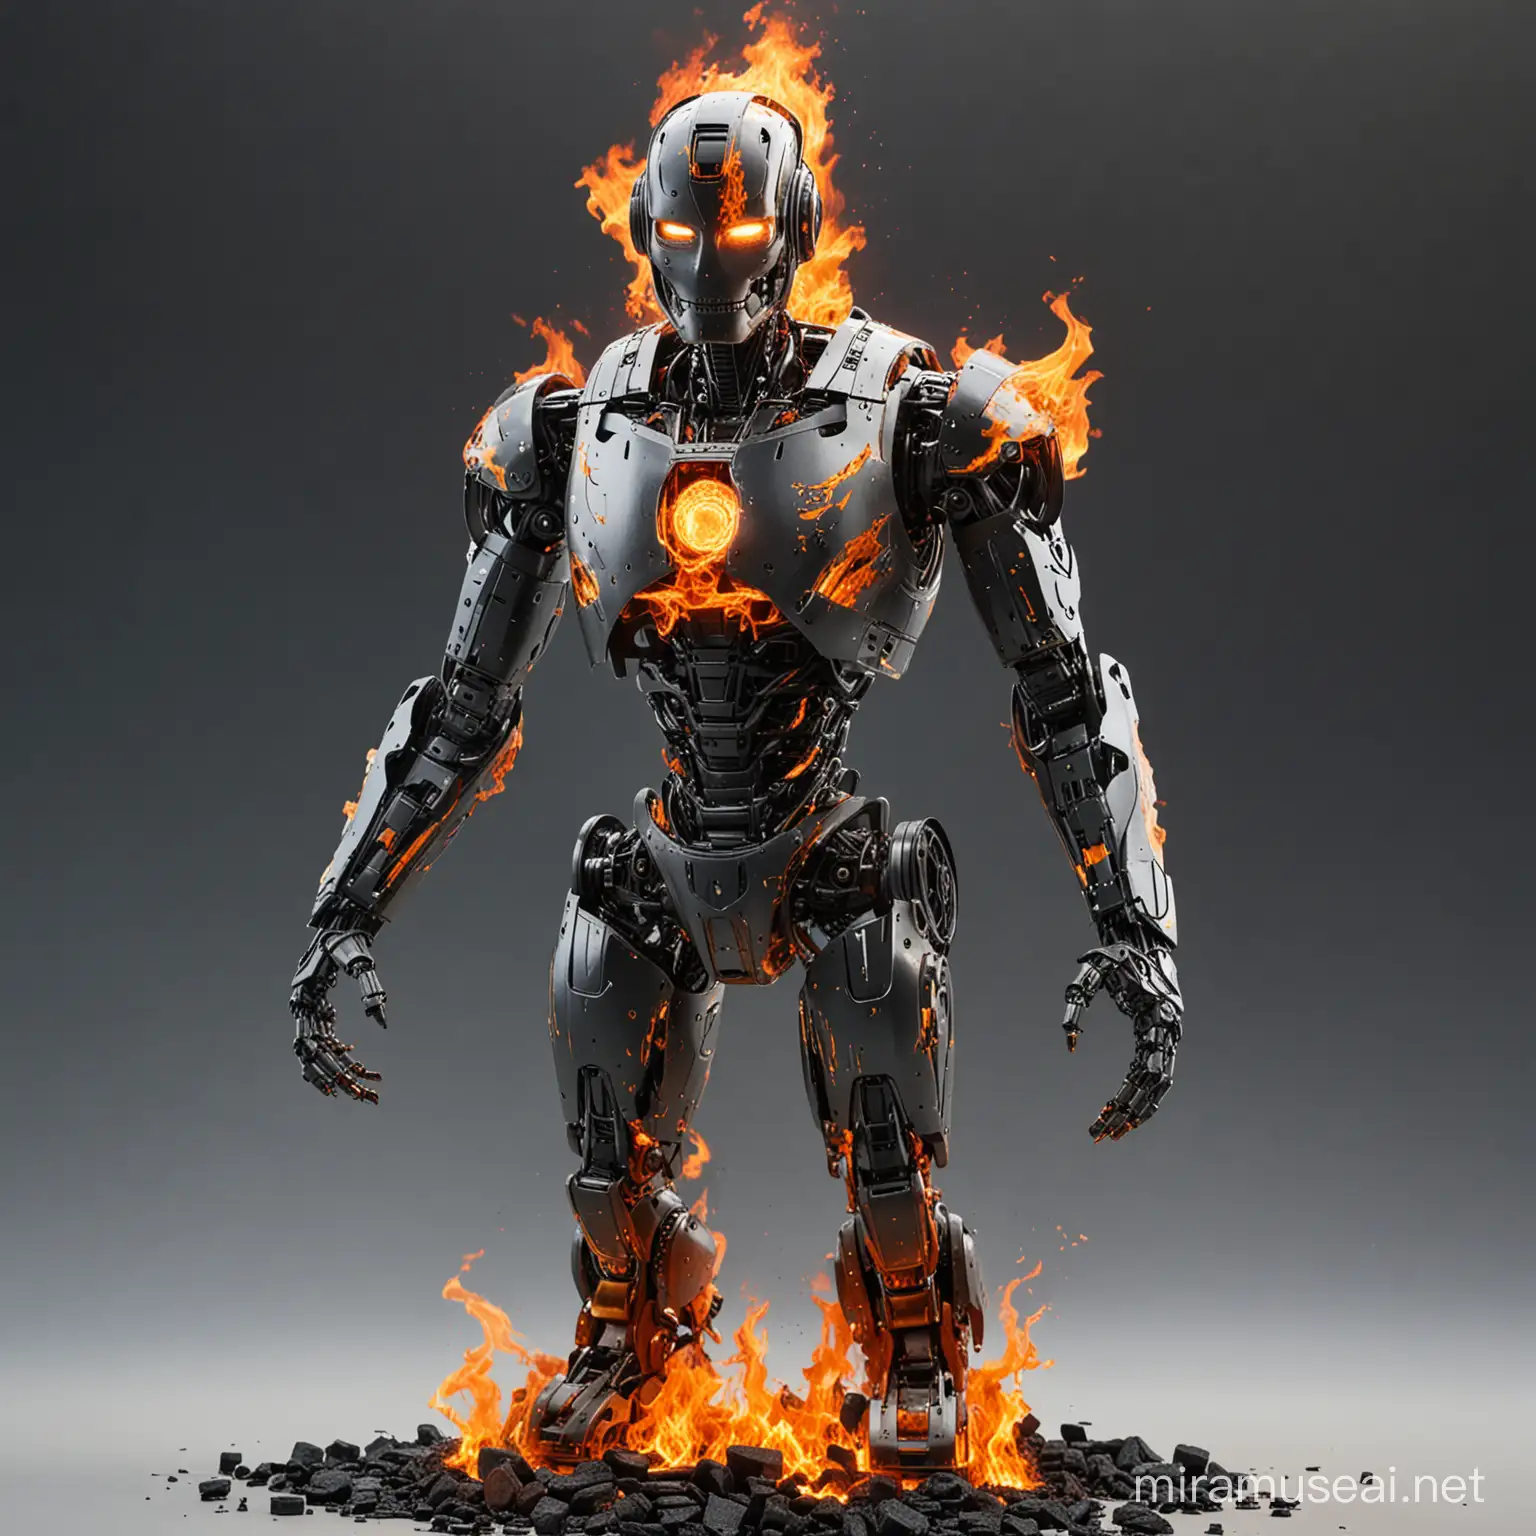 Fiery IRobot A Futuristic Android Engulfed in Flames